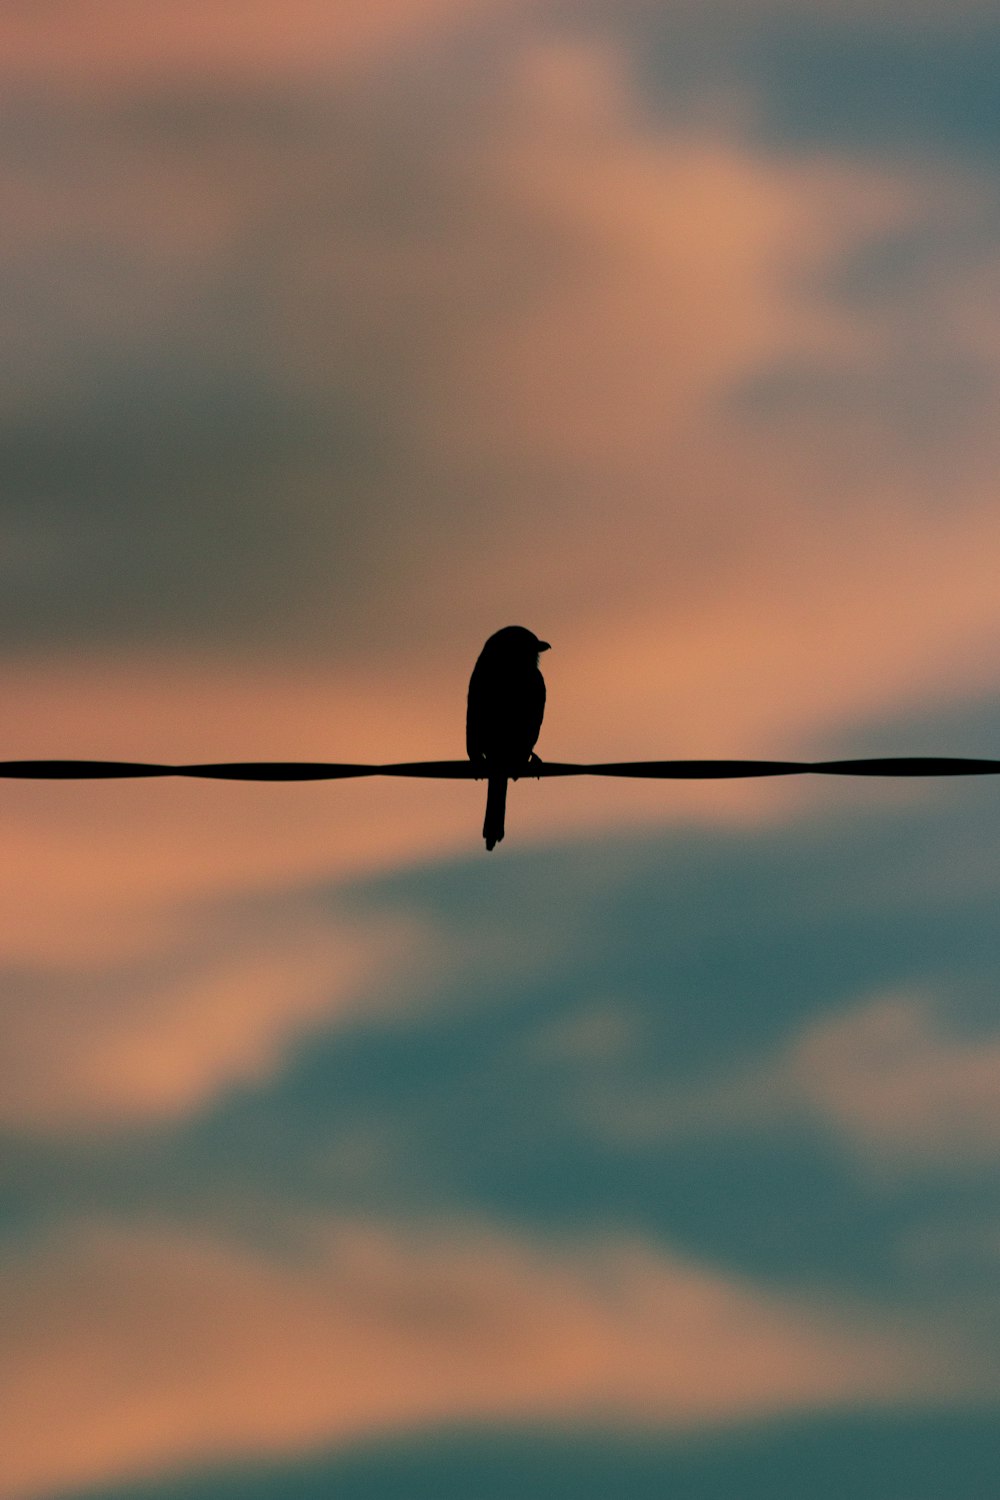 a bird sitting on a wire with a sky in the background